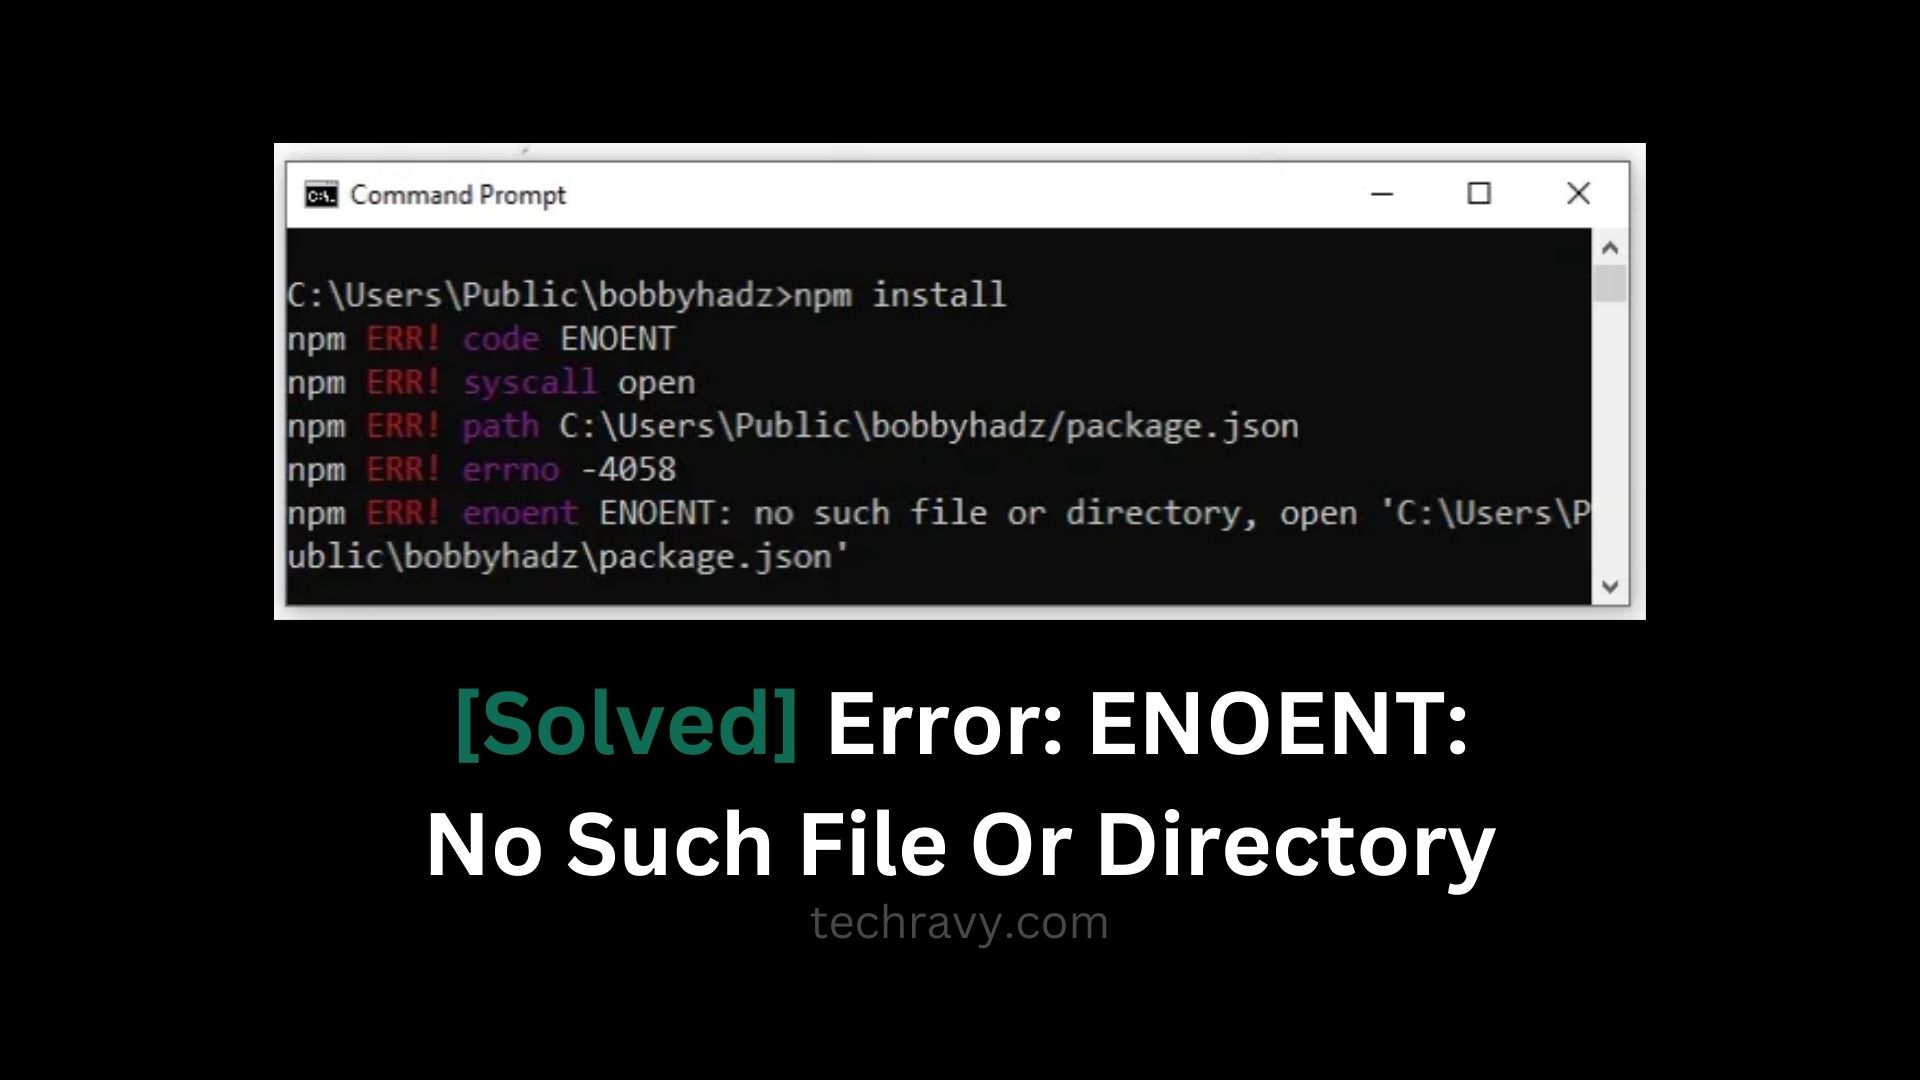 [Solved] Error ENOENT No Such File Or Directory